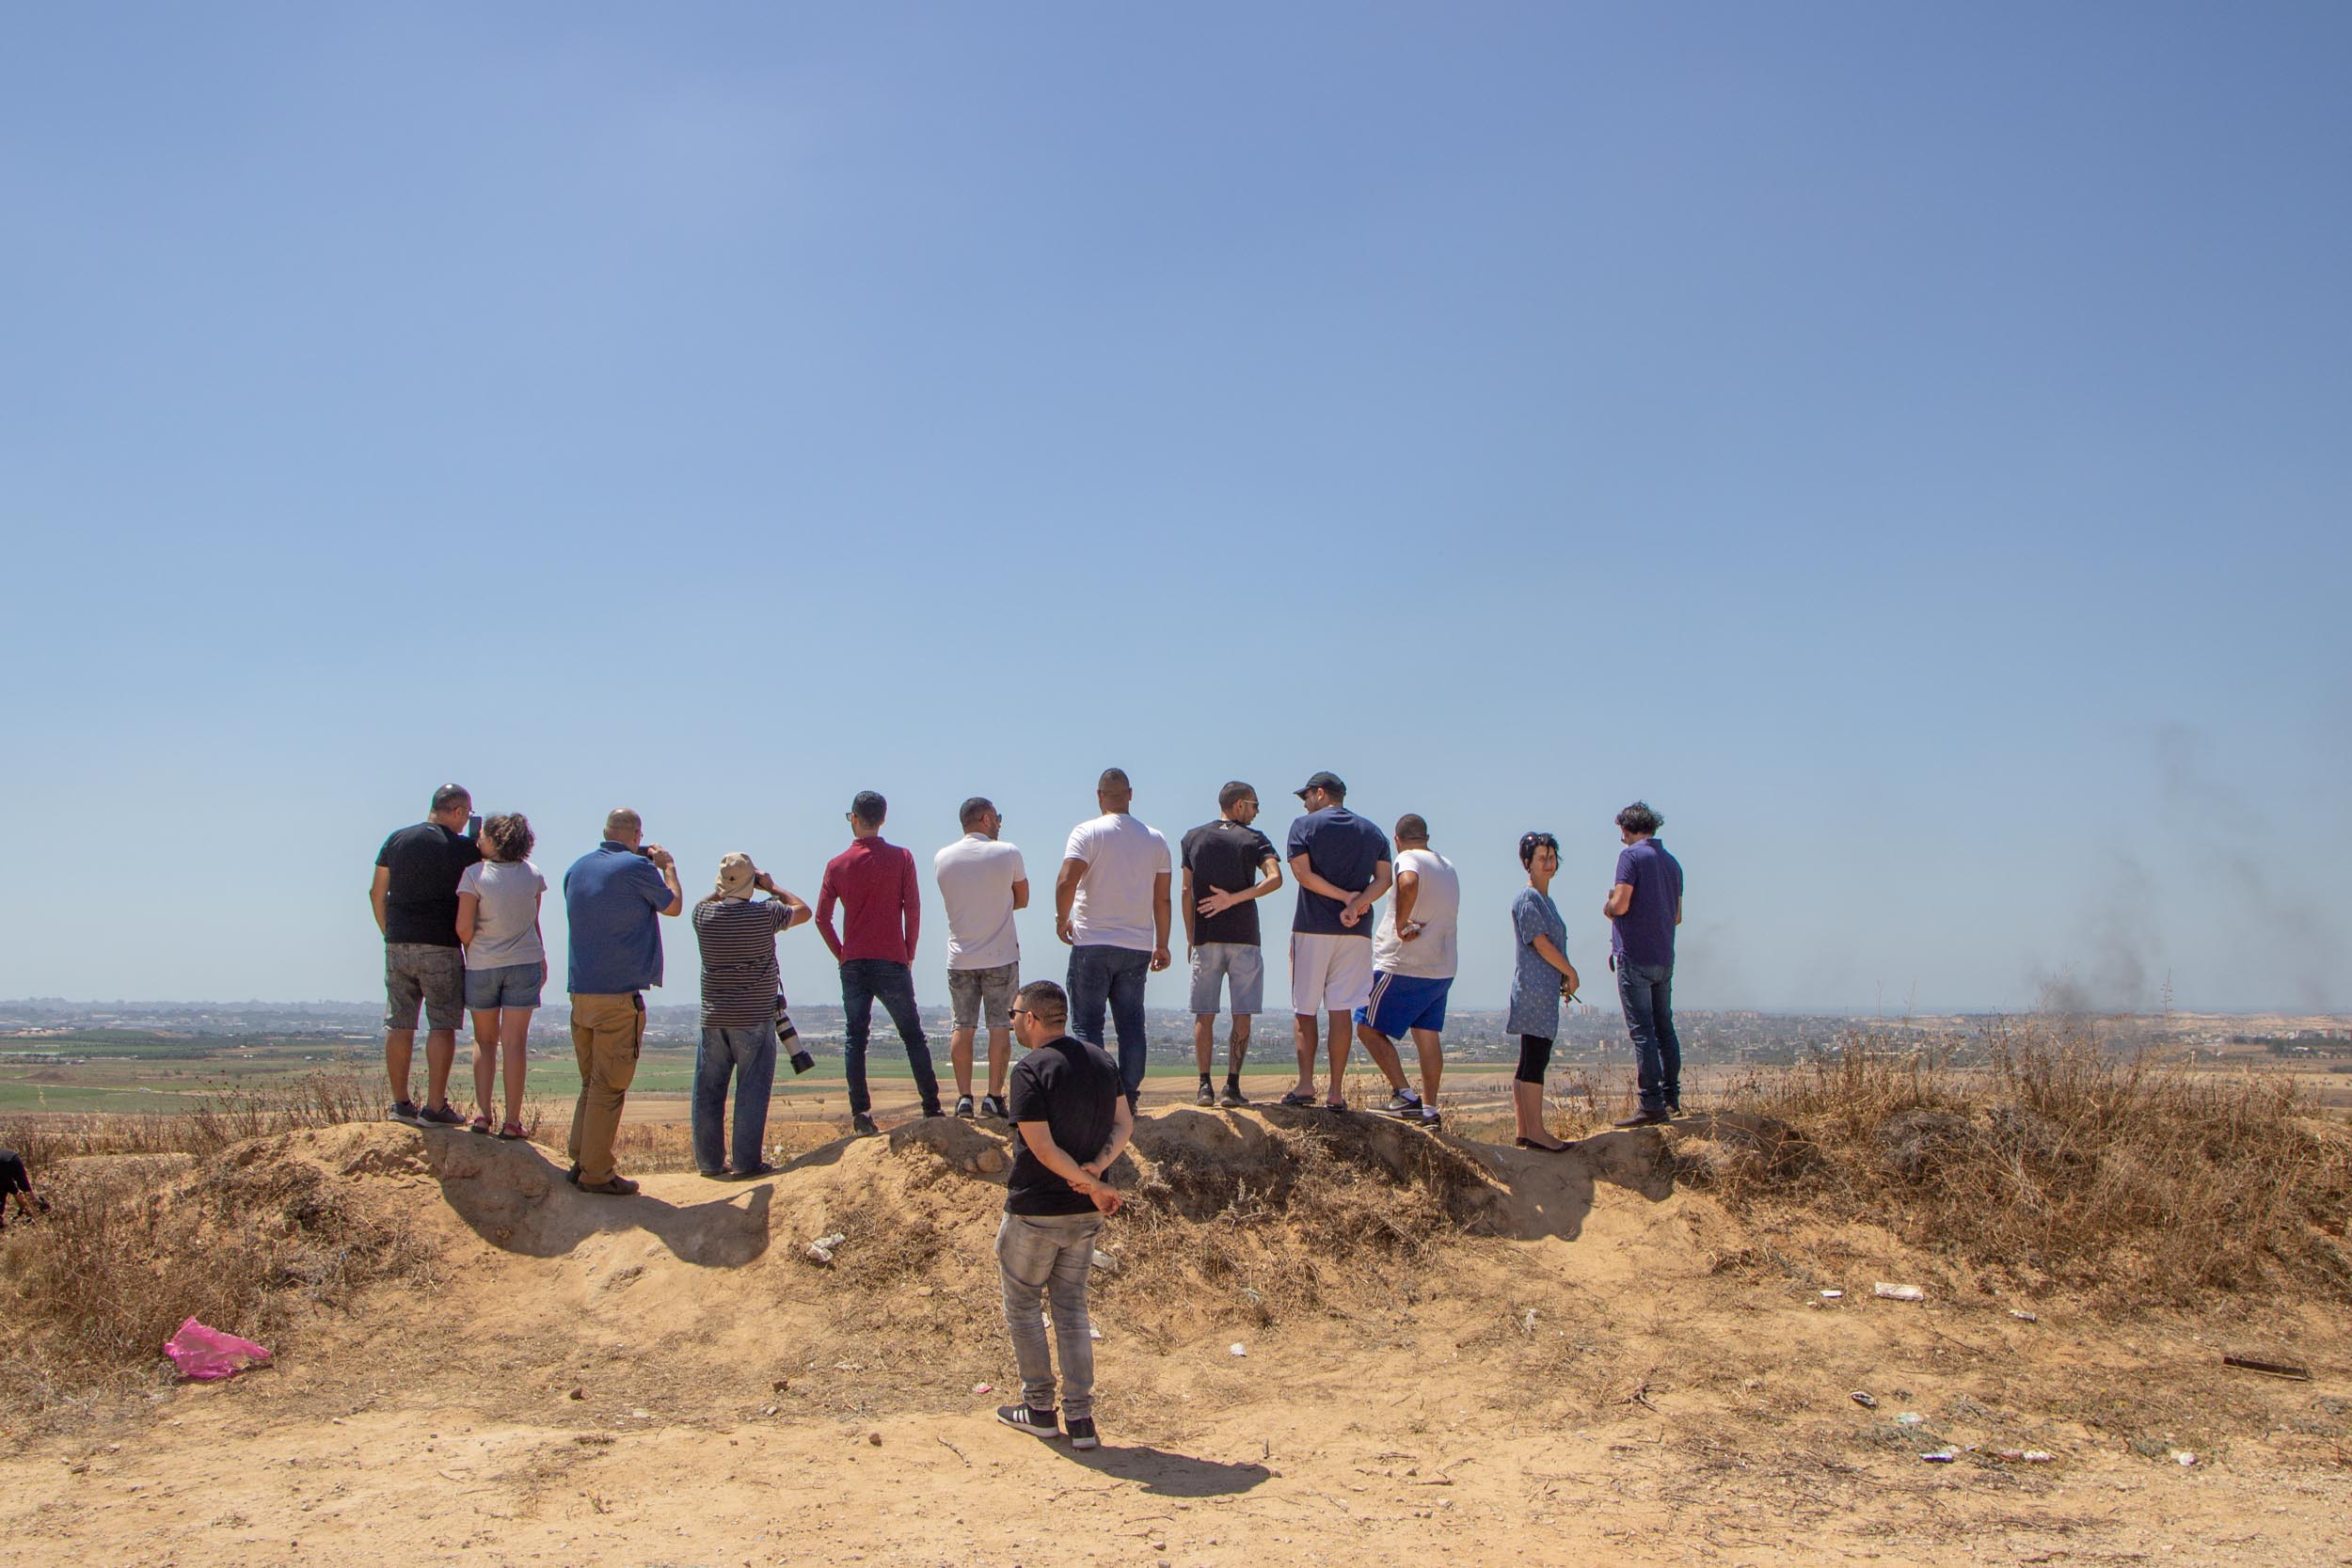 Northern Gaza Border, May 2018 - Israeli citizens of the area come to watch the Gaza border